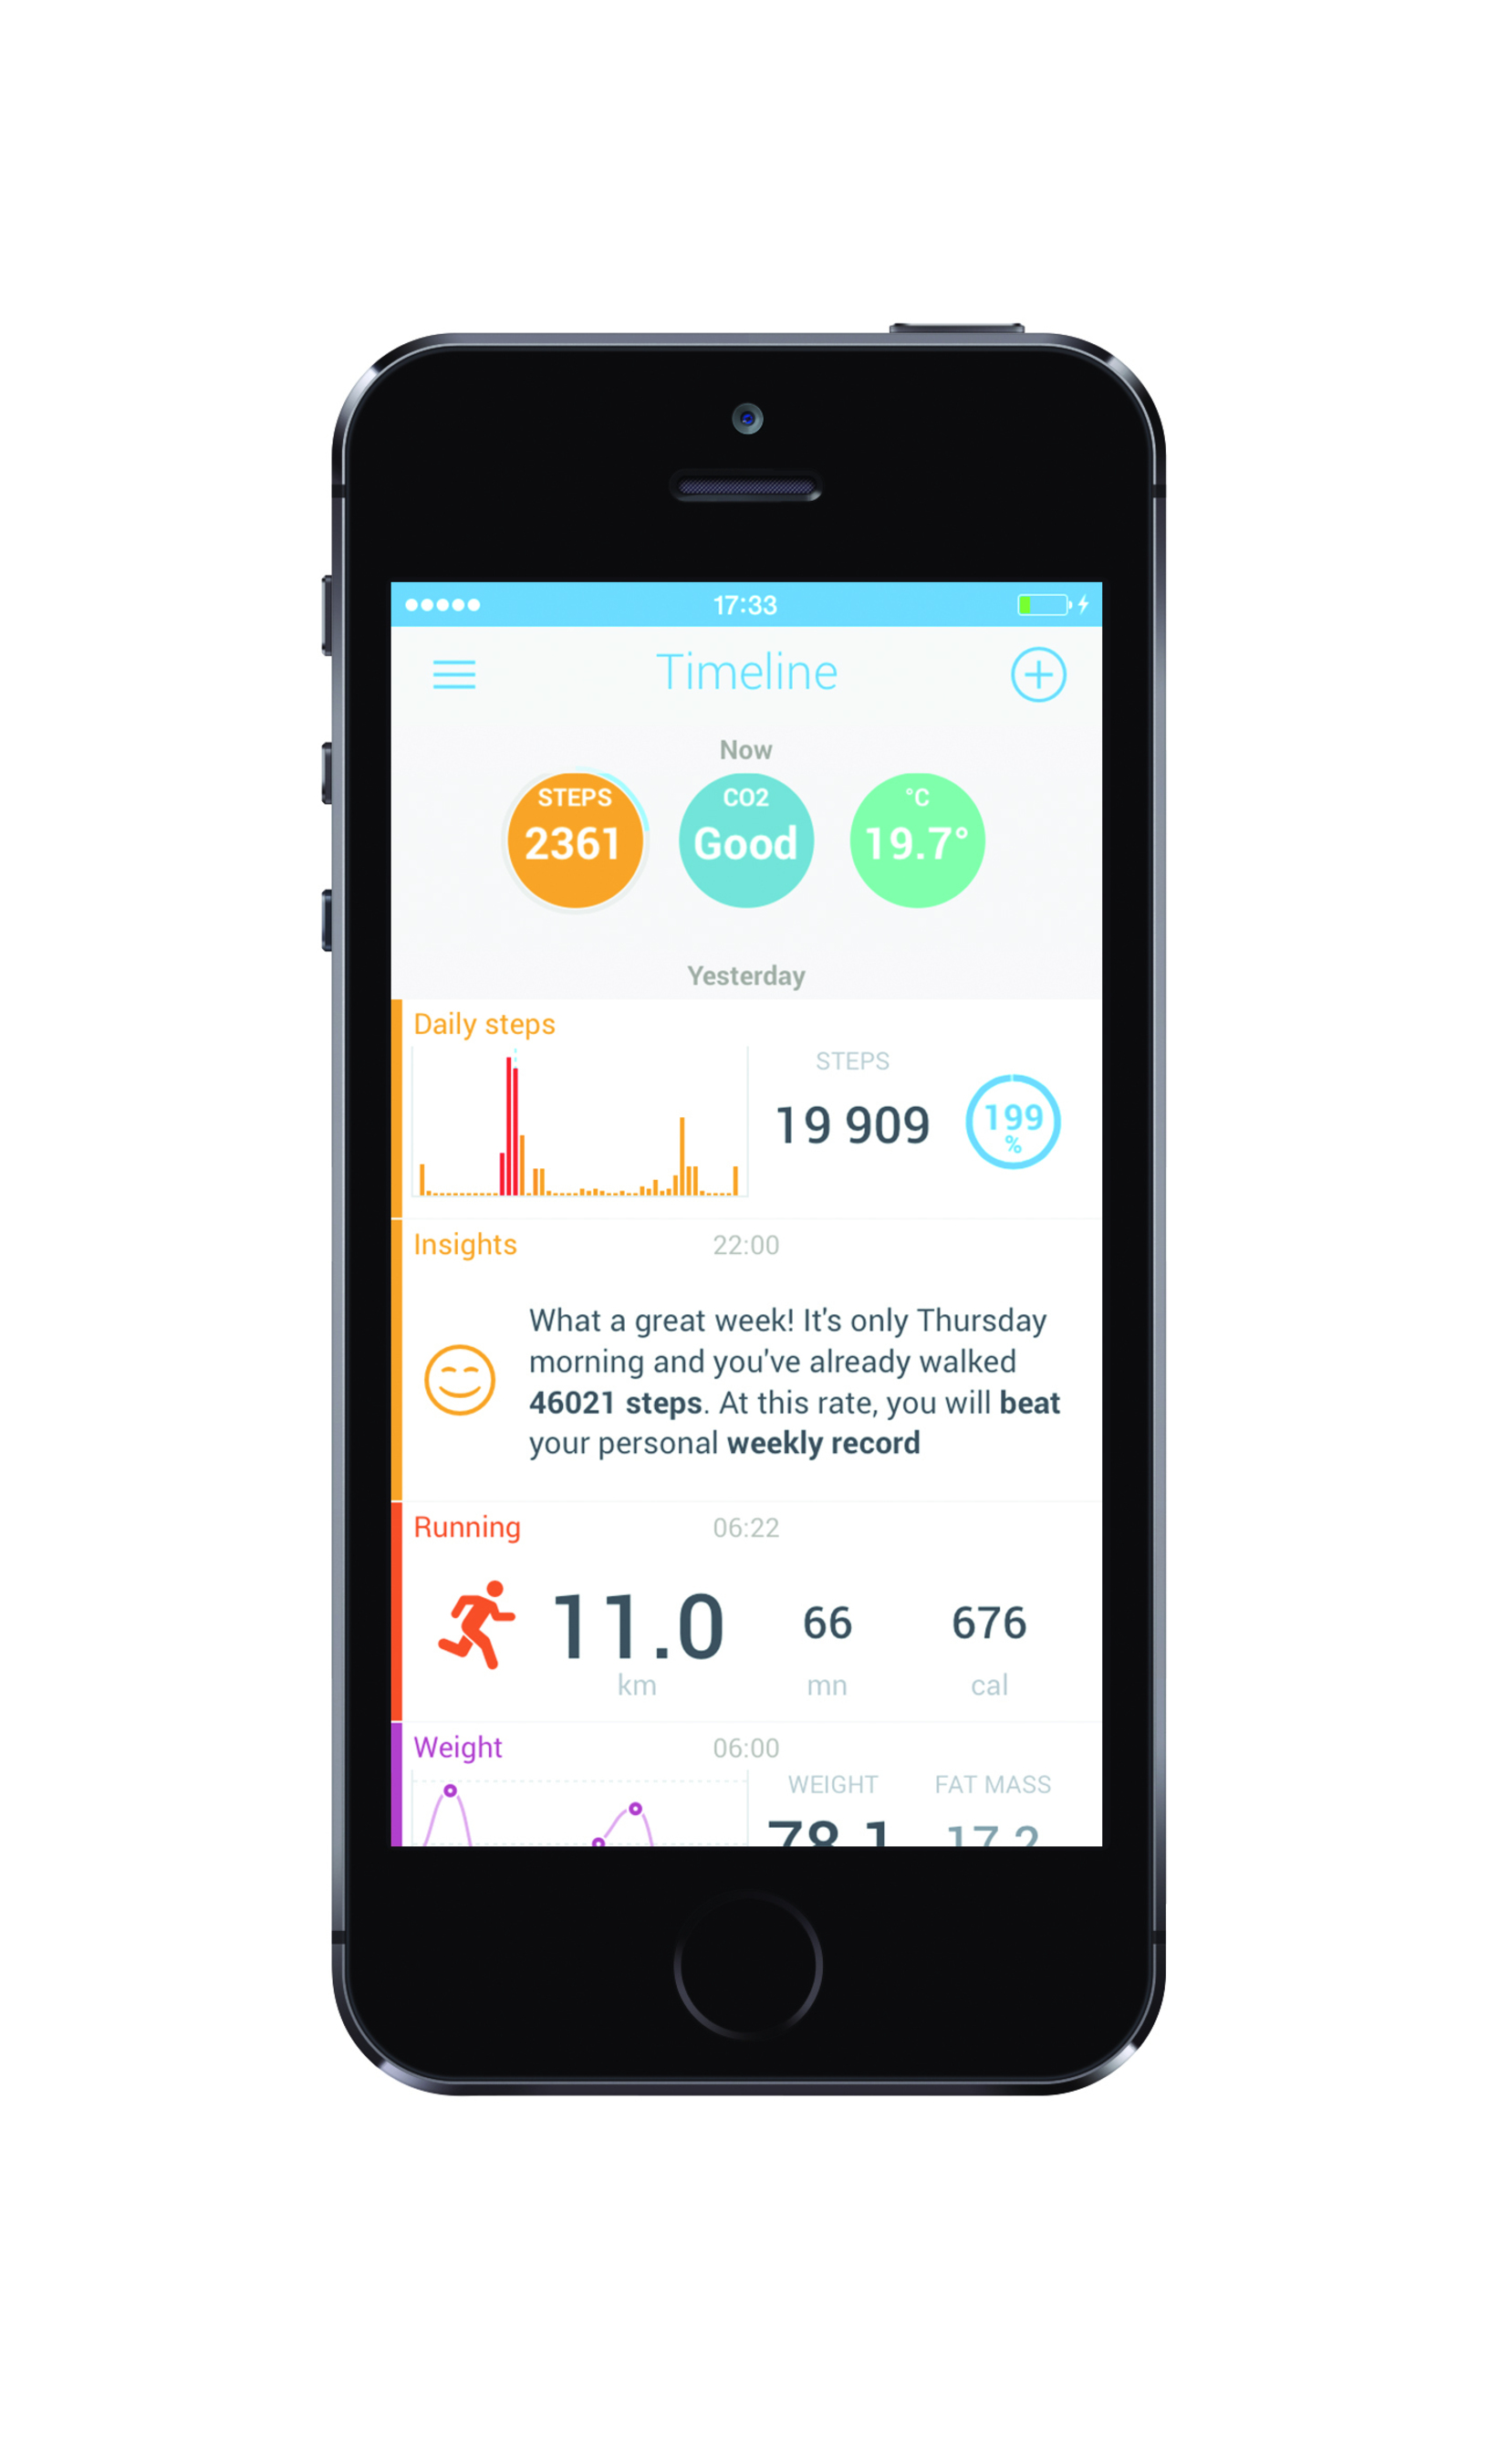 Withings' updated Health Mate app now features real-time coaching that turns the data from Withings devices into actionable advice. (PRNewsFoto/Withings)